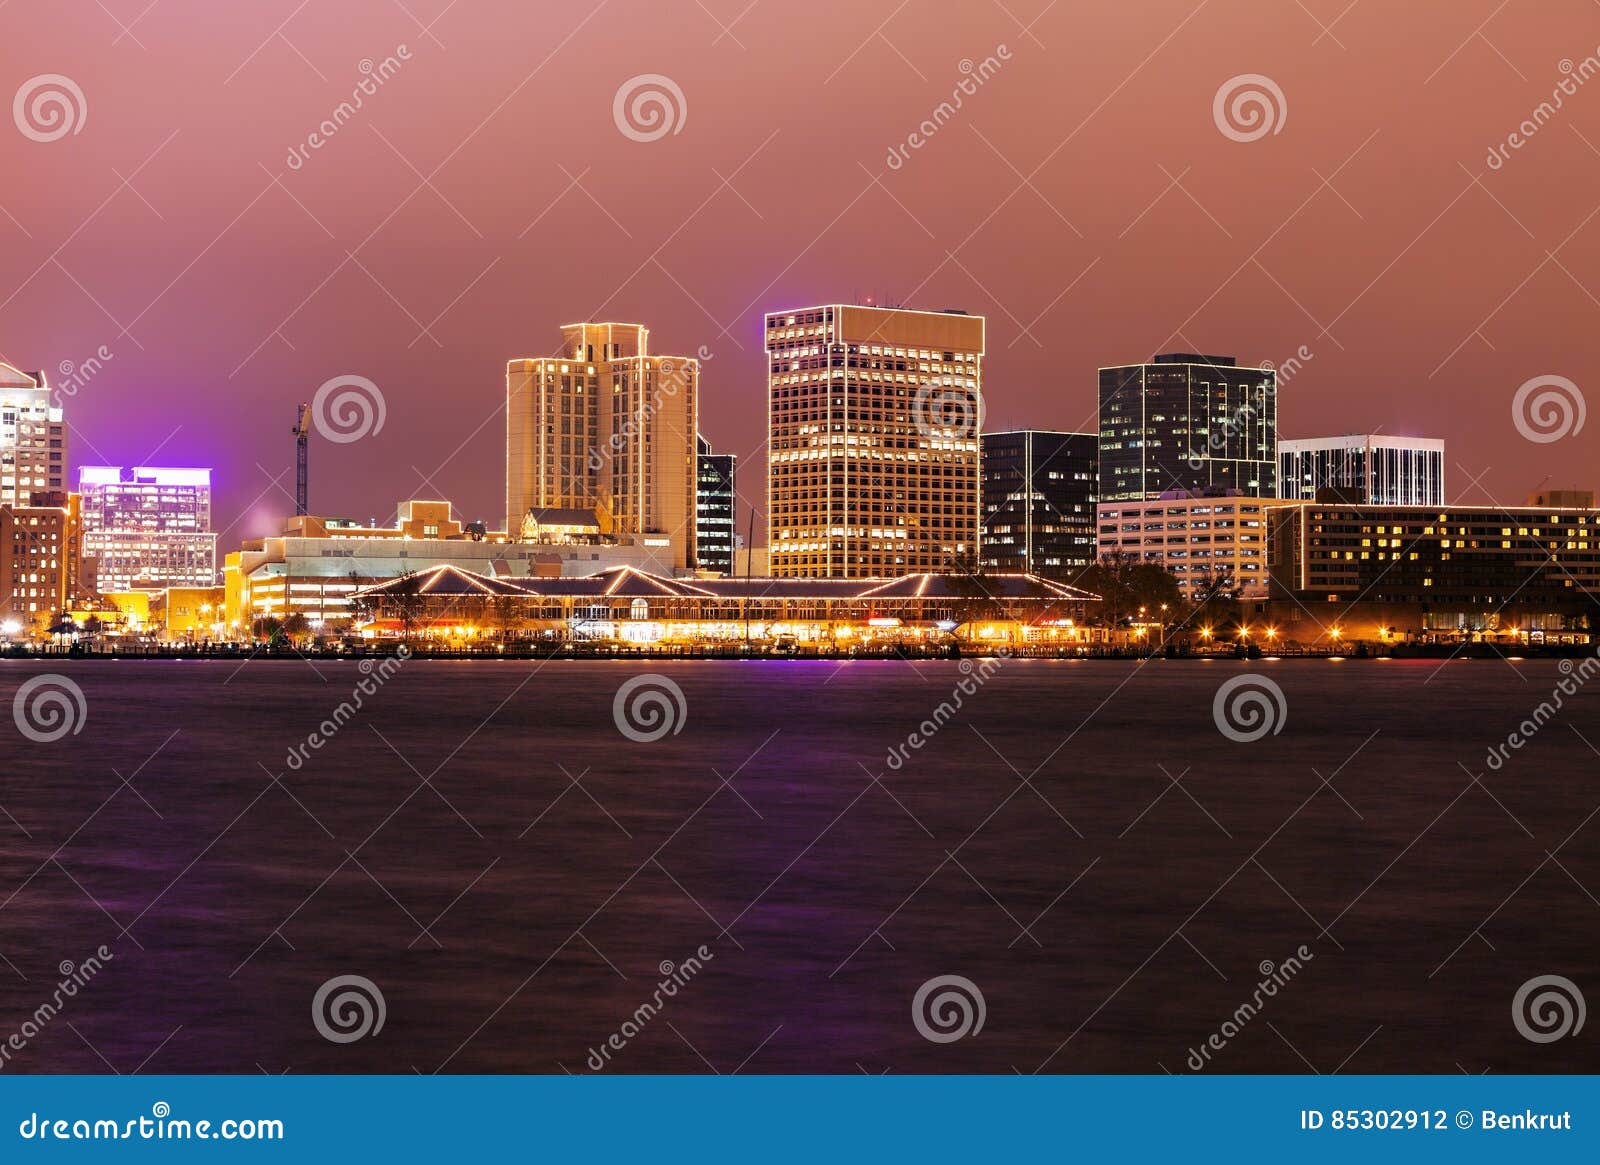 181 Norfolk Skyline Photos Free Royalty Free Stock Photos From Dreamstime